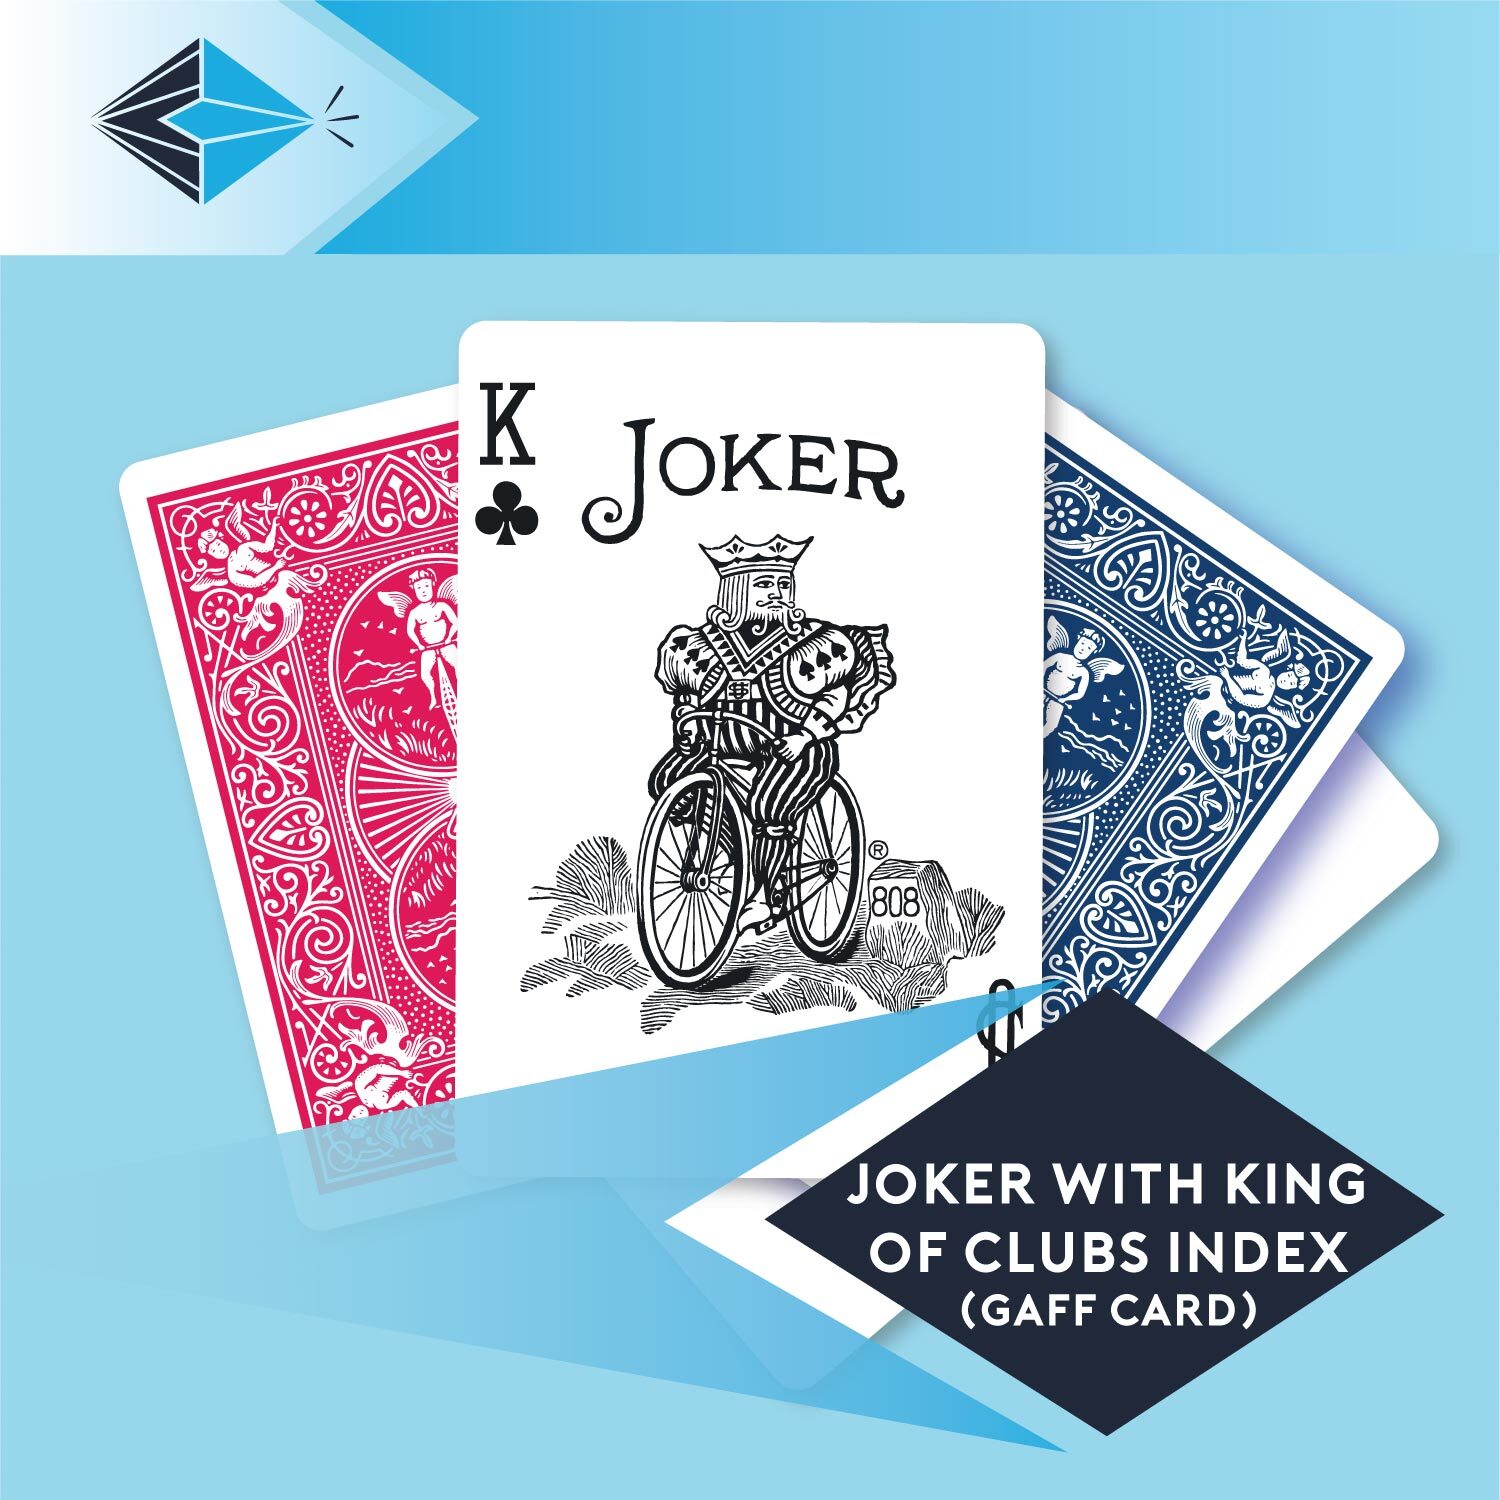 joker with king of clubs index misindexed playing cards gaff cards 18 magic magicians printing printer Stockport Manchester UK